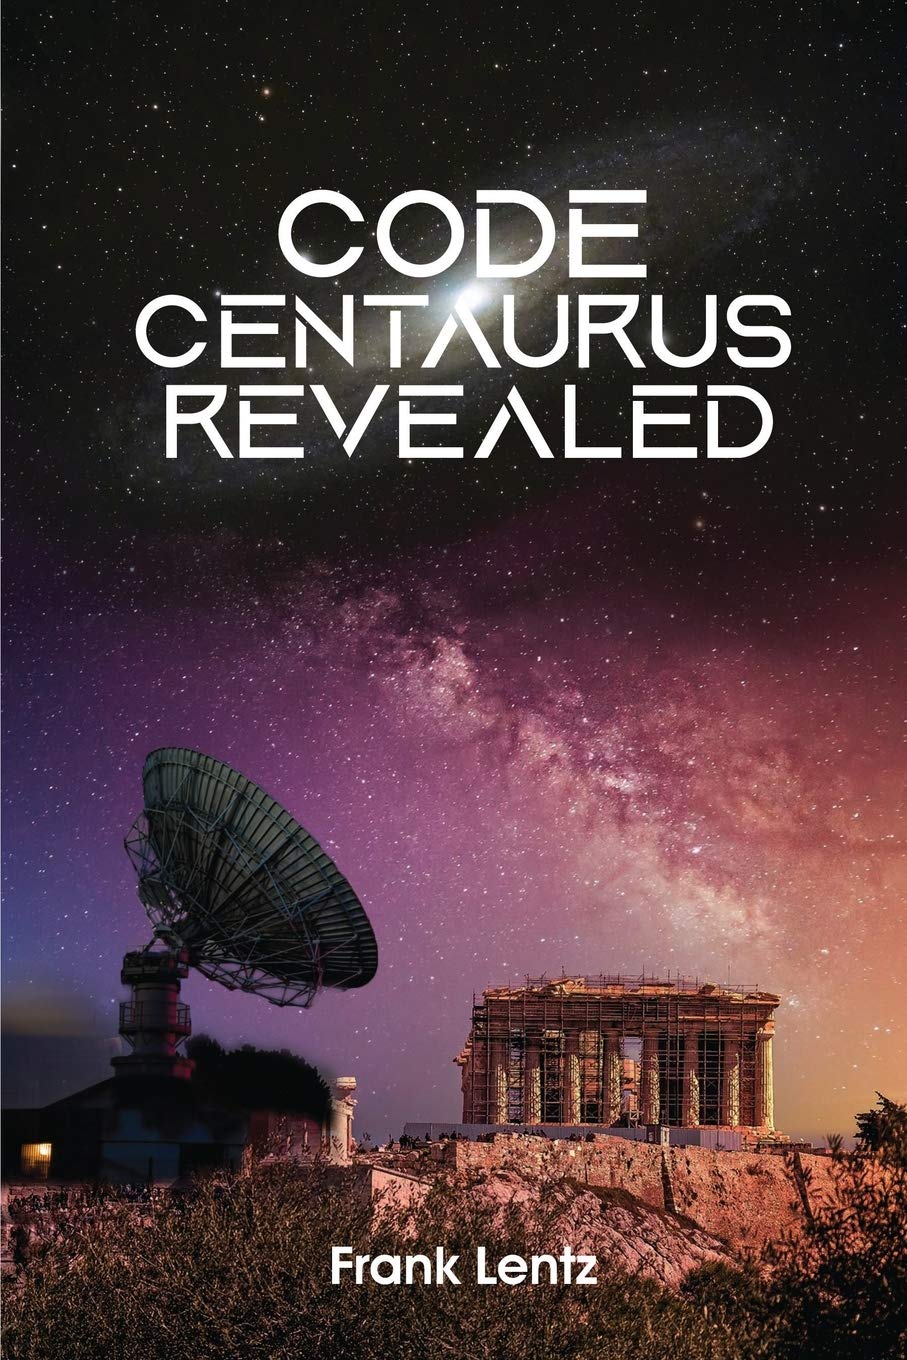 ‘Code Centaurus Revealed’ by Frank Lentz is a Sci-Fi Thriller Story for Adventure Spirited Souls